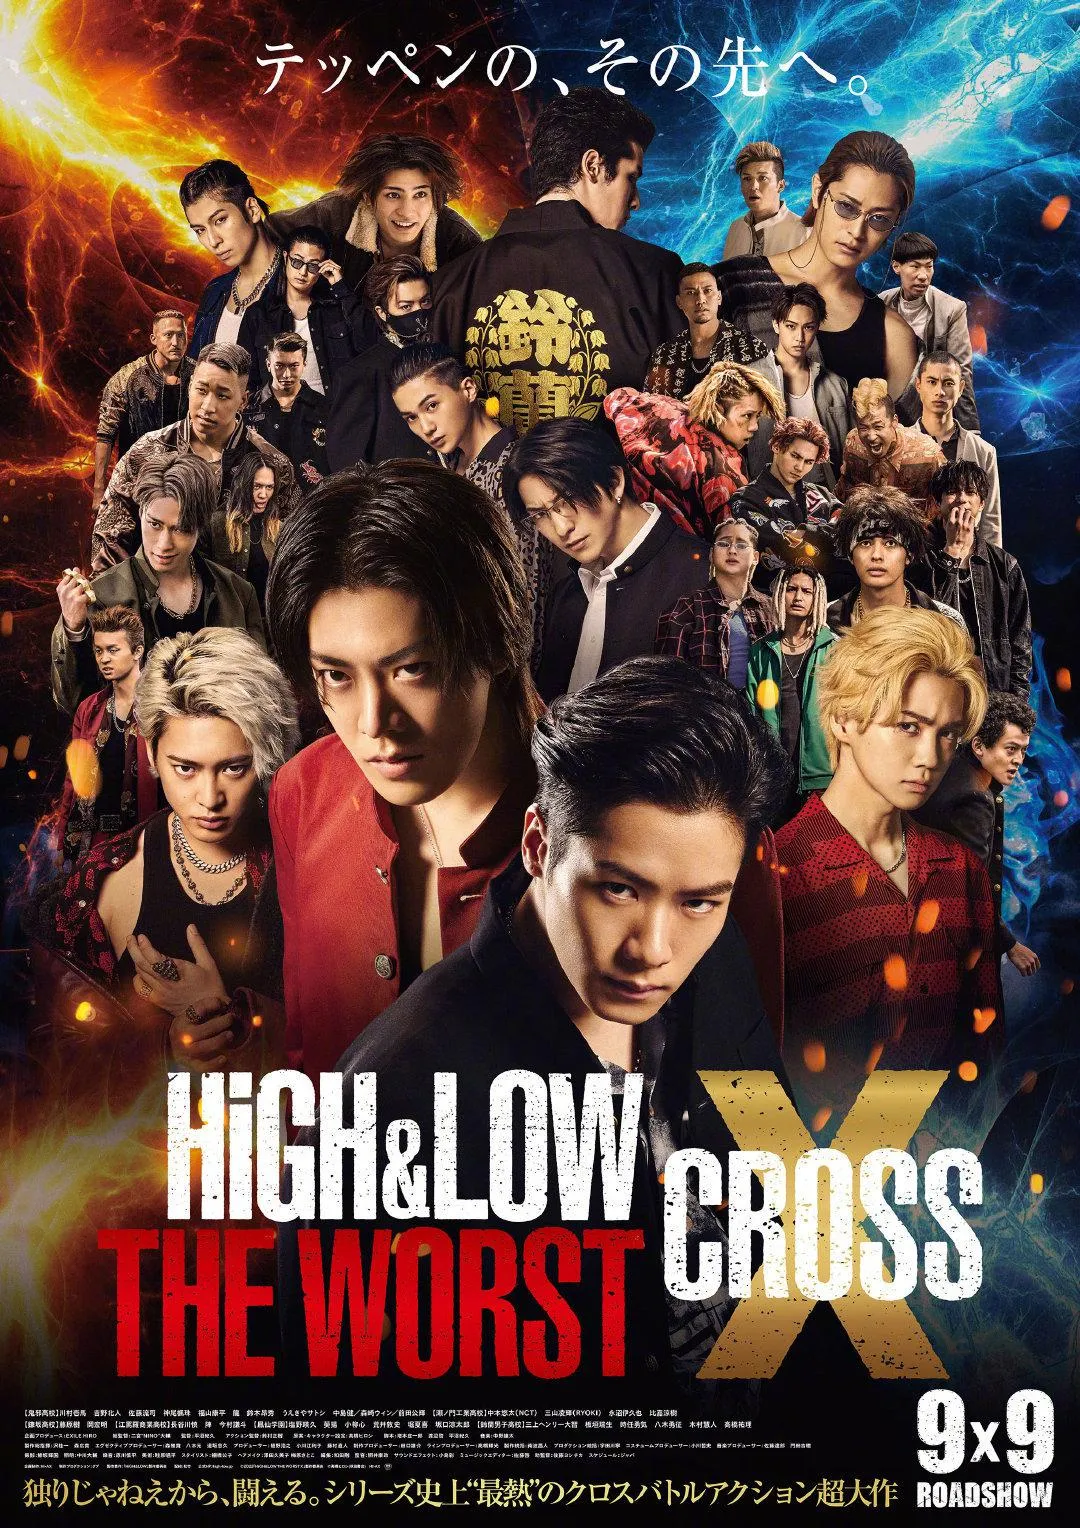 'HiGH & LOW THE WORST X' reveals new trailer, it will be released in Japan on 9.9 | FMV6